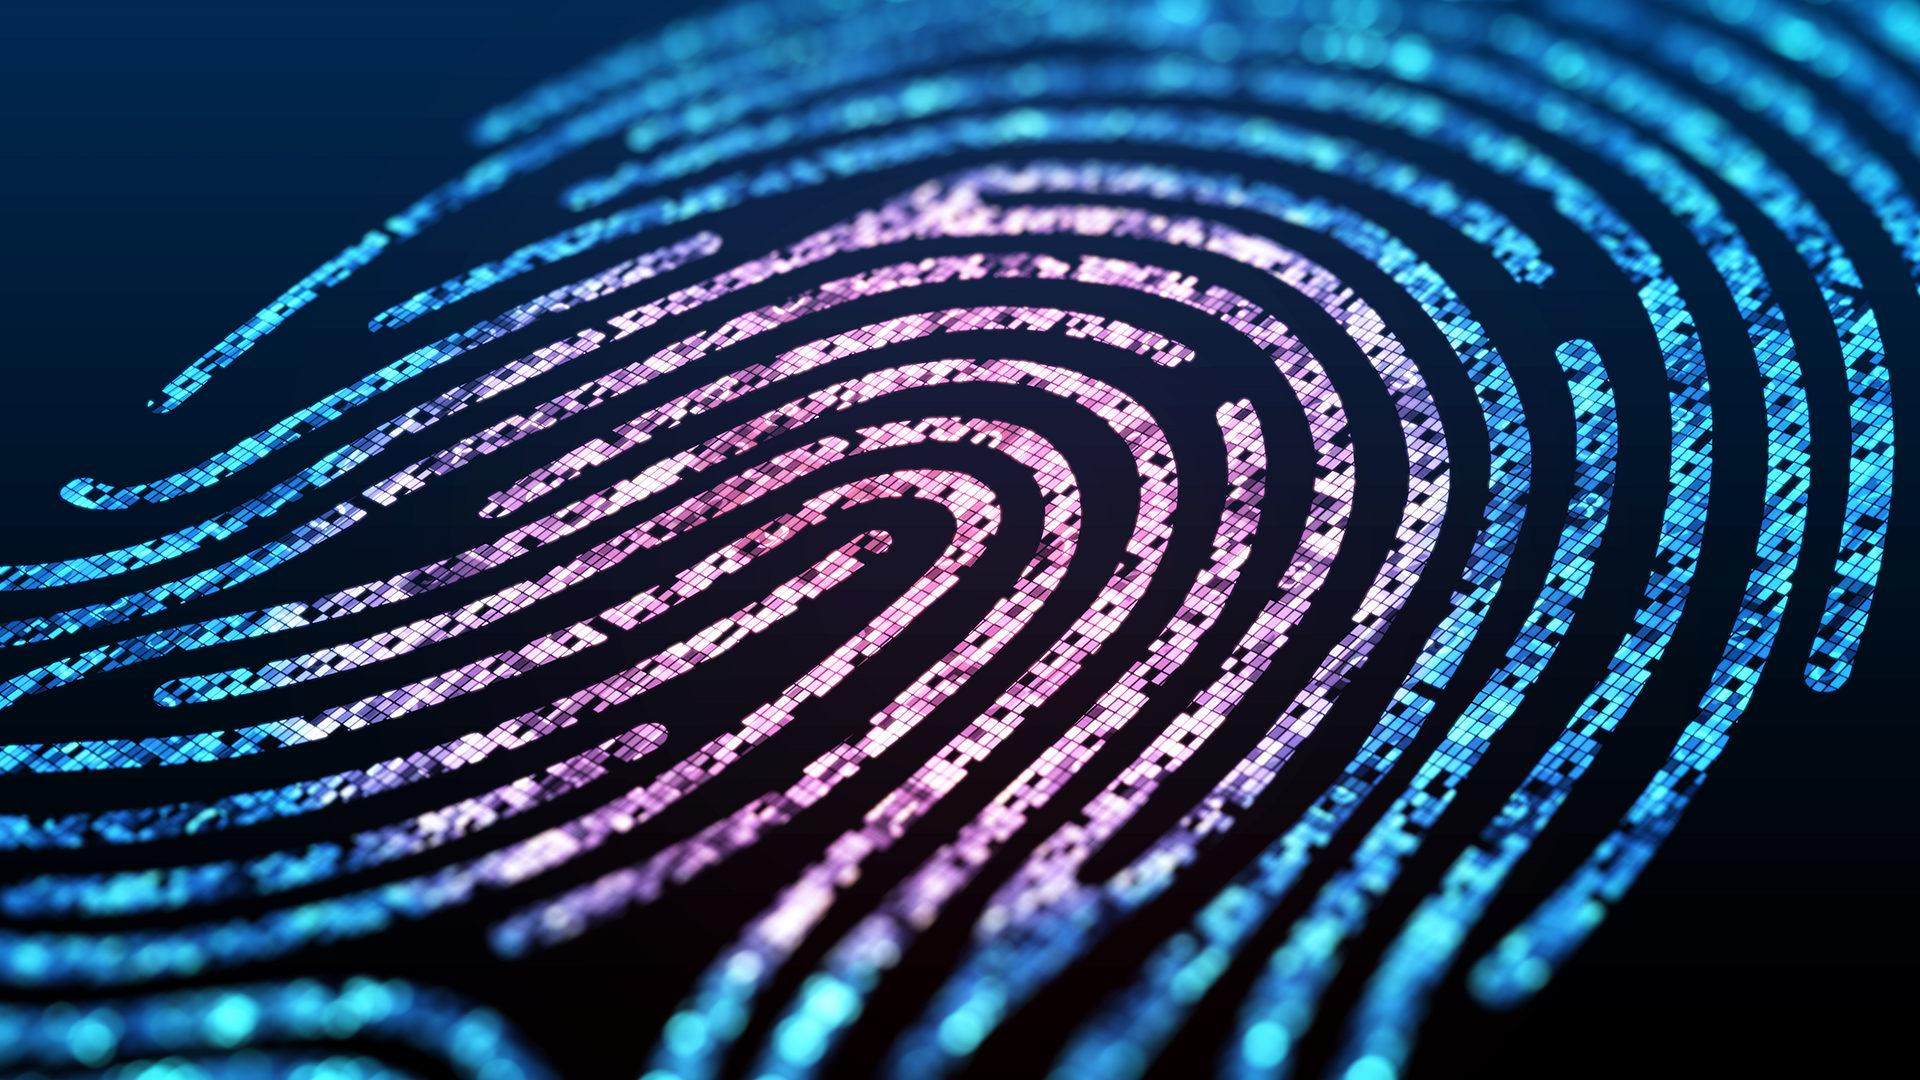 Digital fingerprint scan conveying the notion of cybersecurity and confidential computing..